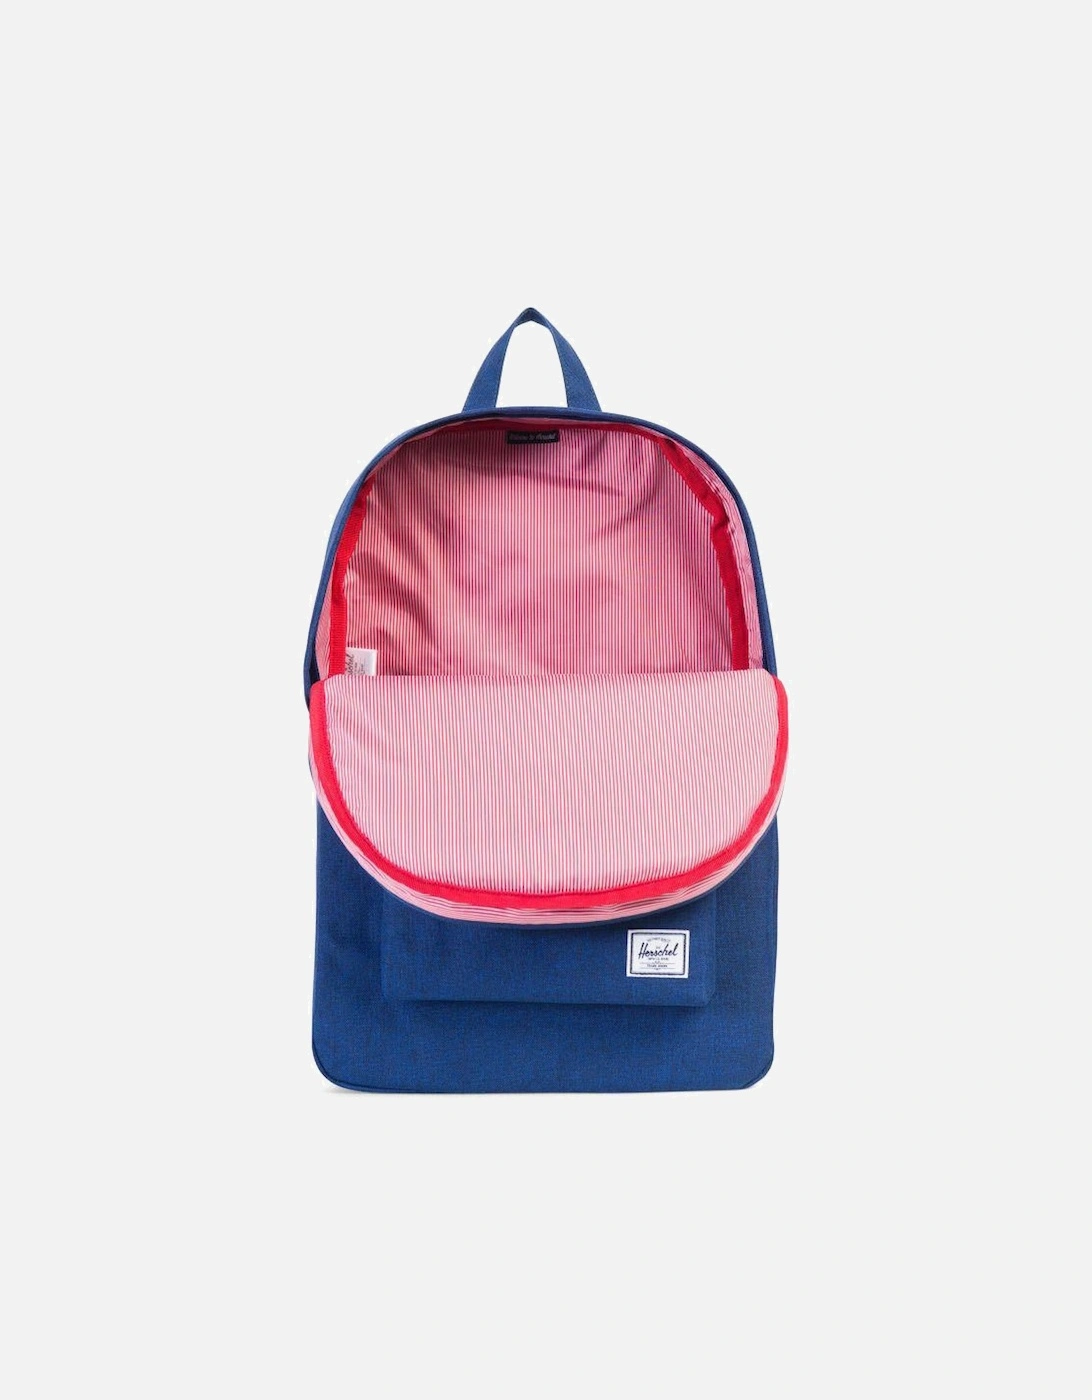 Supply Co - Classic Backpack Eclipse Crosshatch Blue